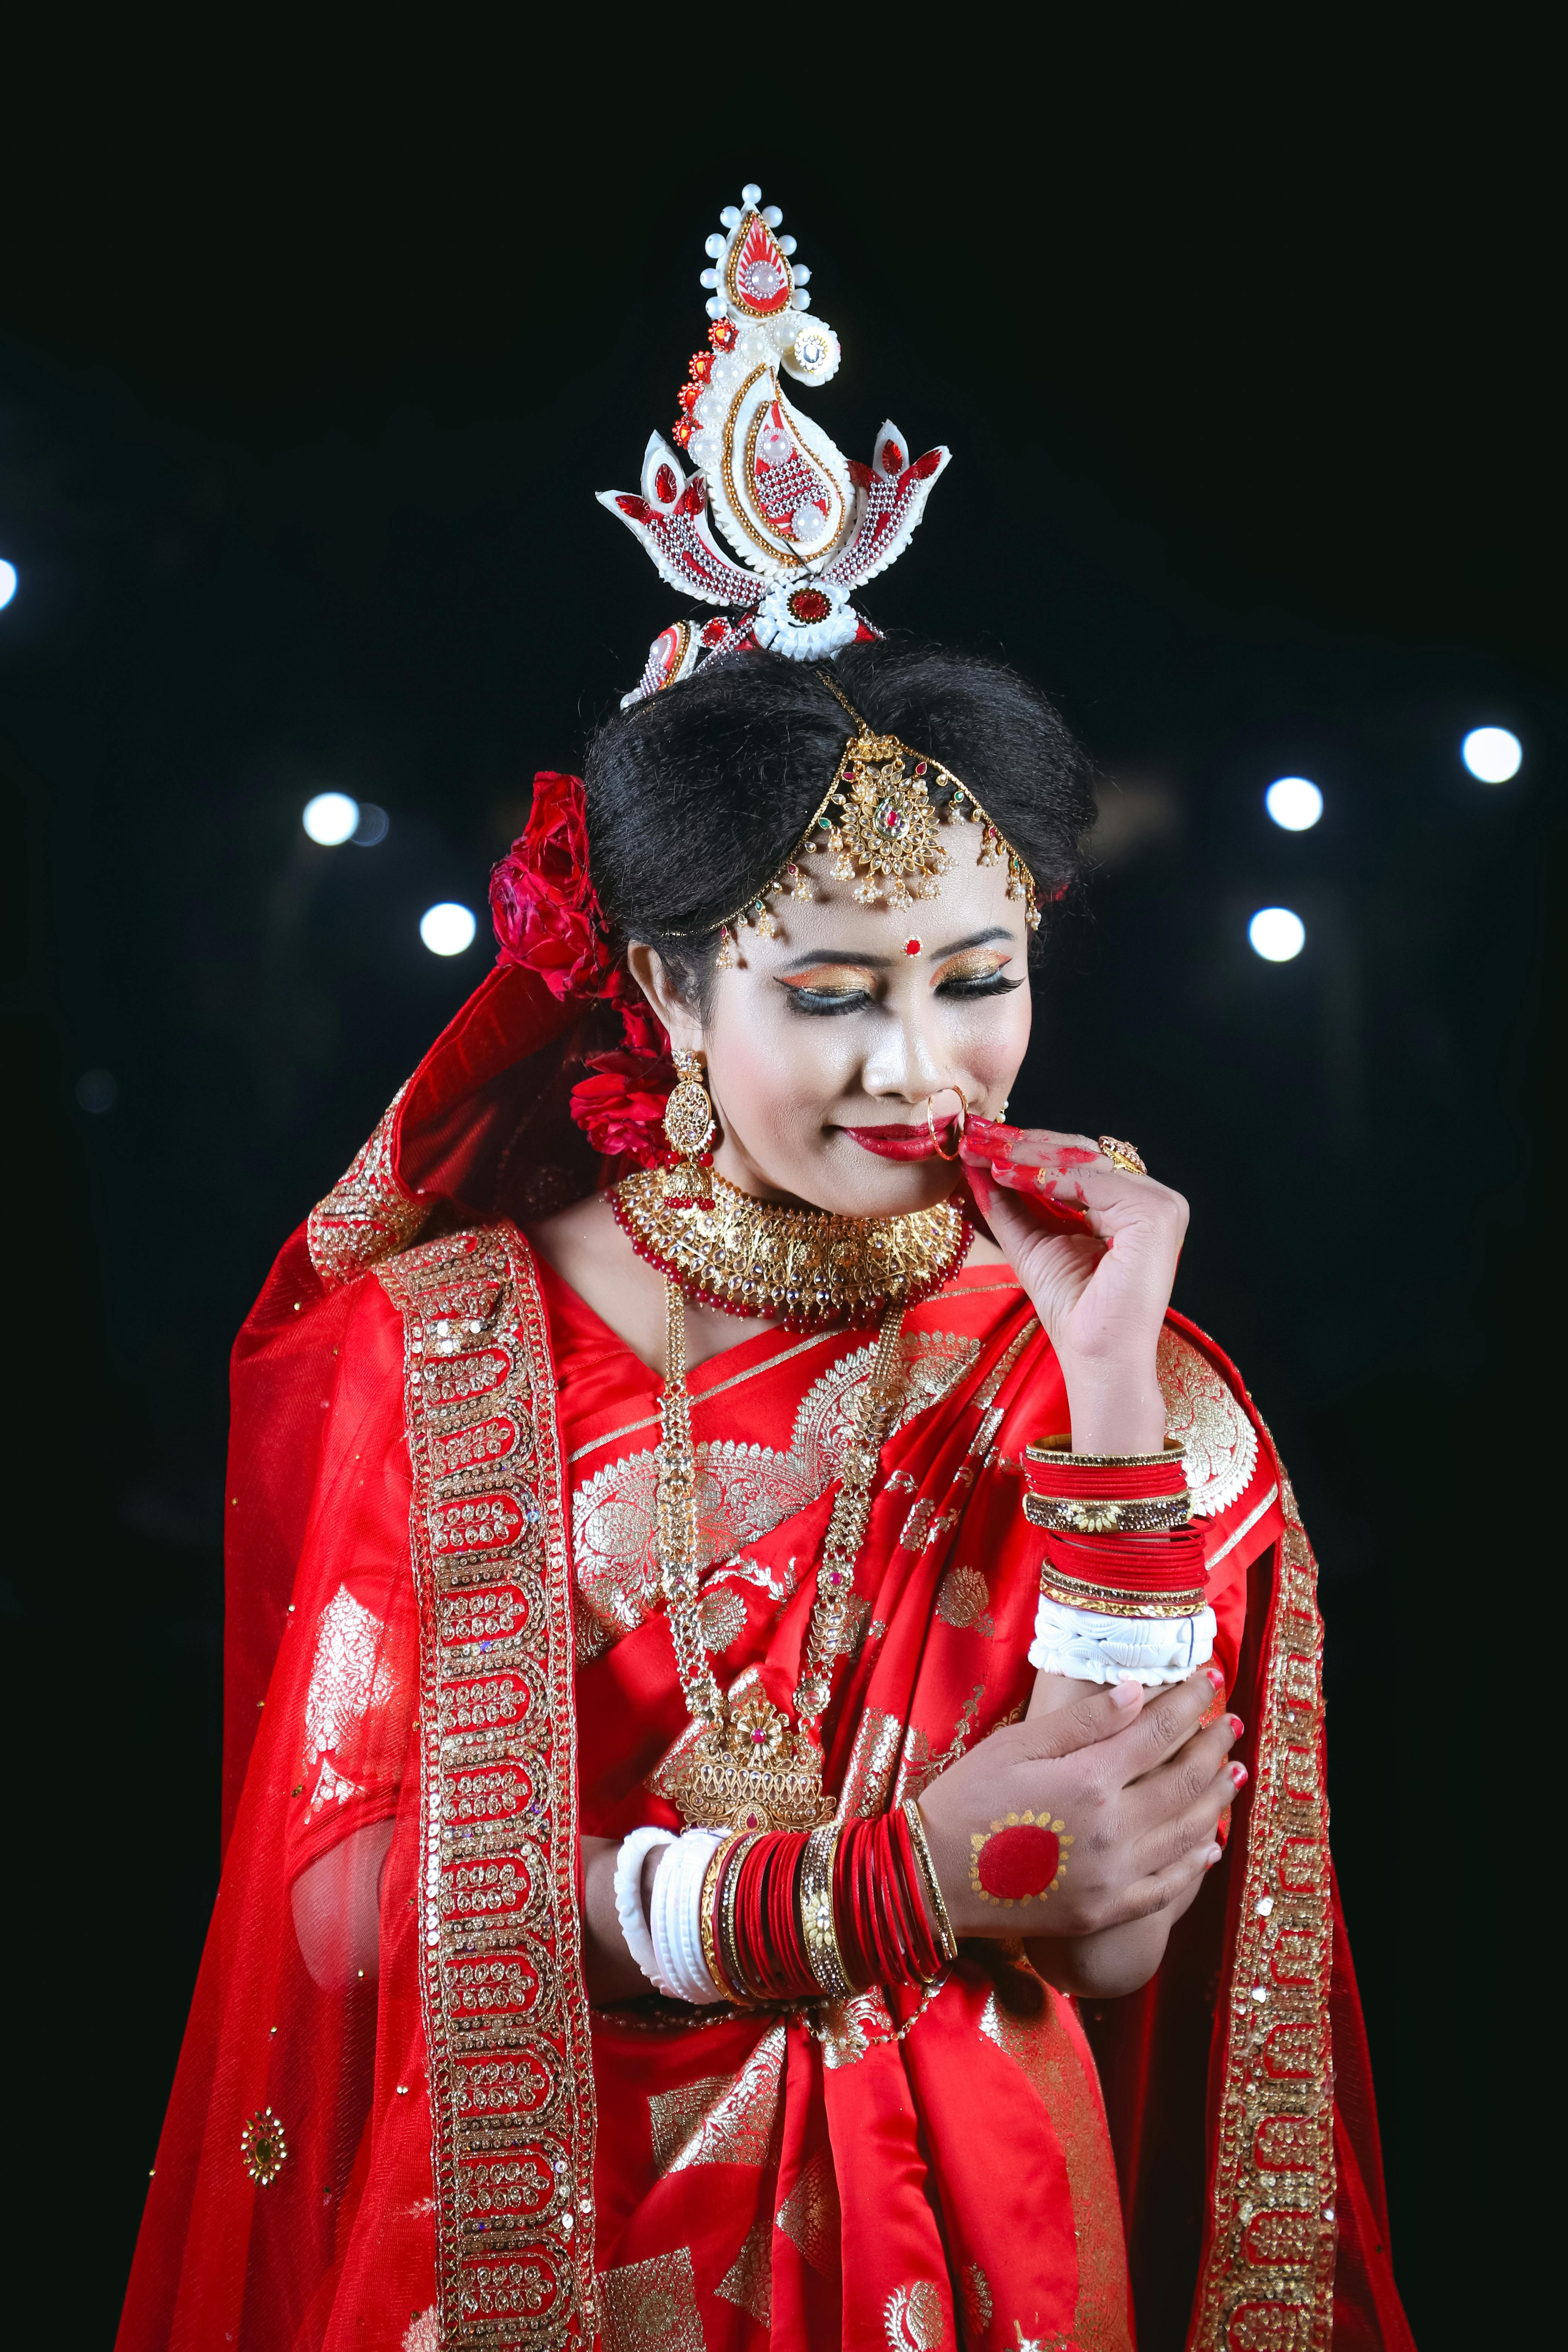 Hindu bride stock image. Image of nose, marriage, jewelry - 10542287